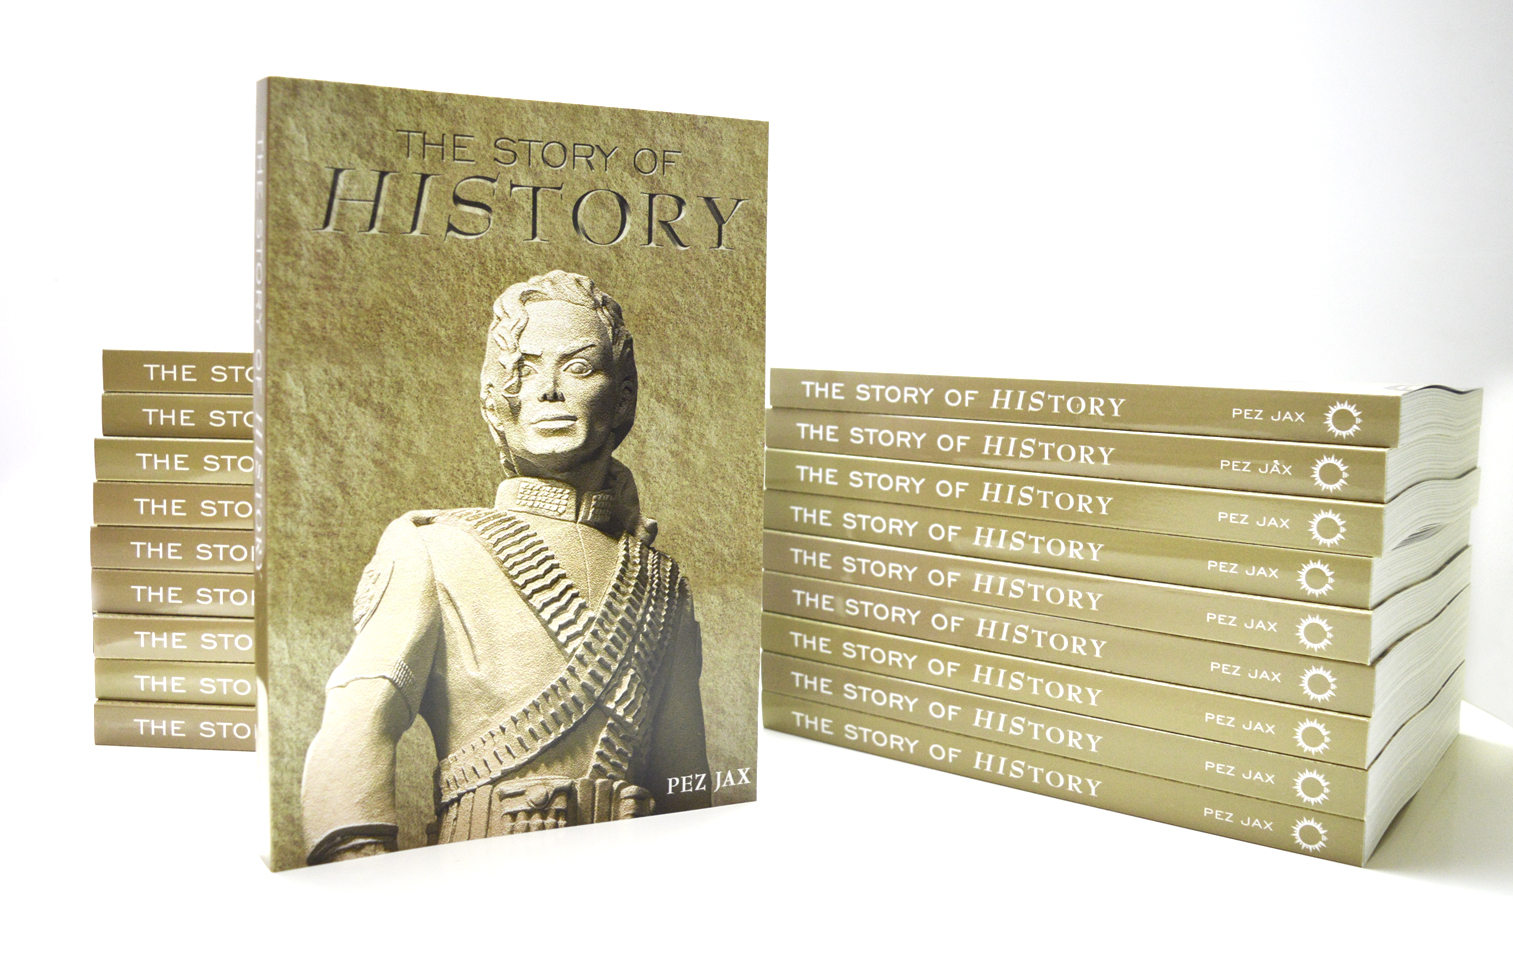 The-story-of-history-book-selection